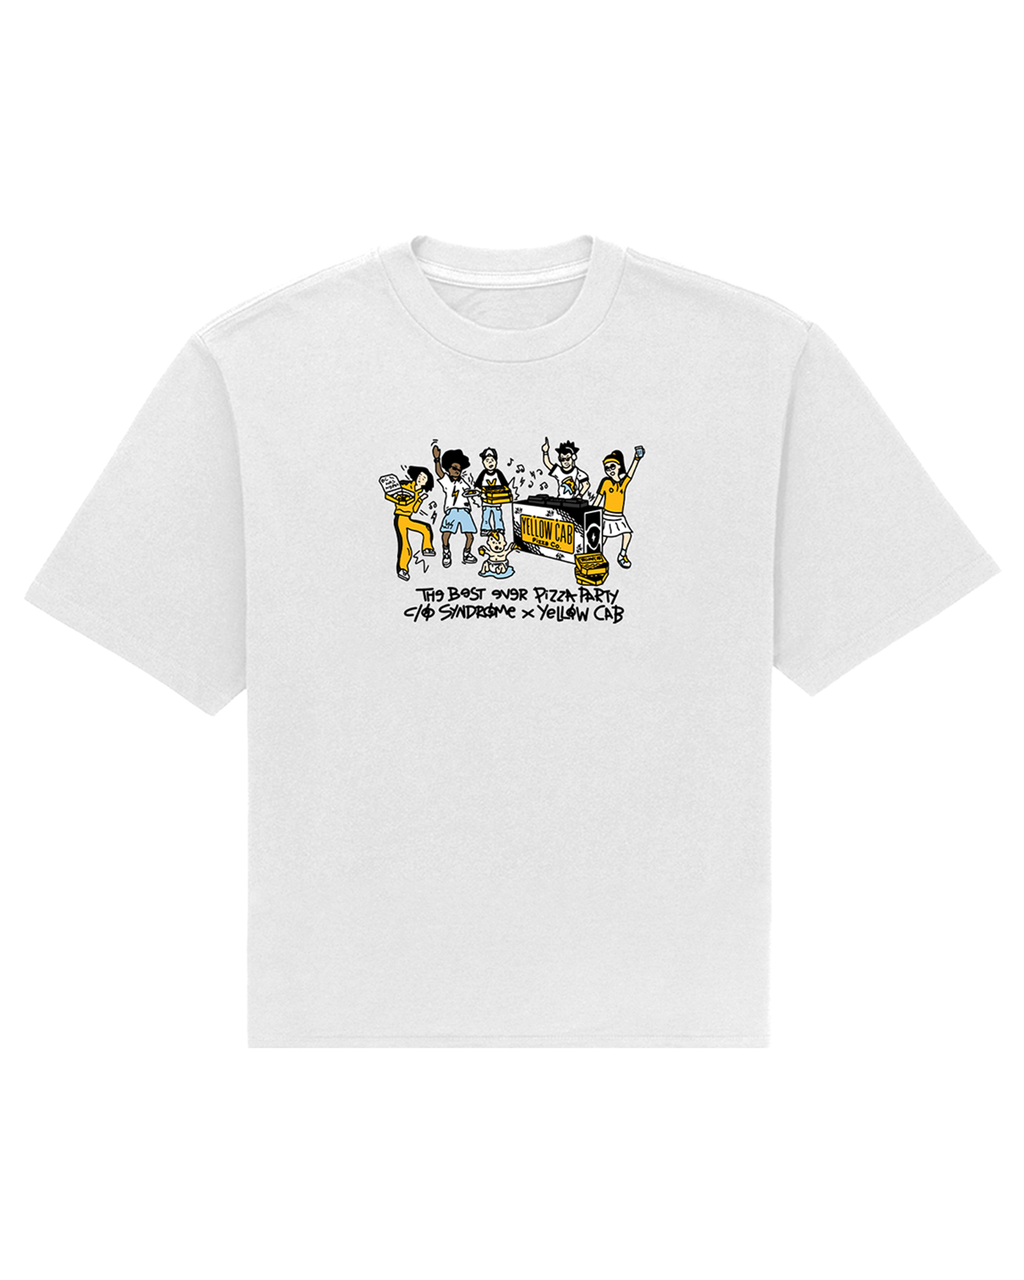 Yellow Cab x Syndrome Tee